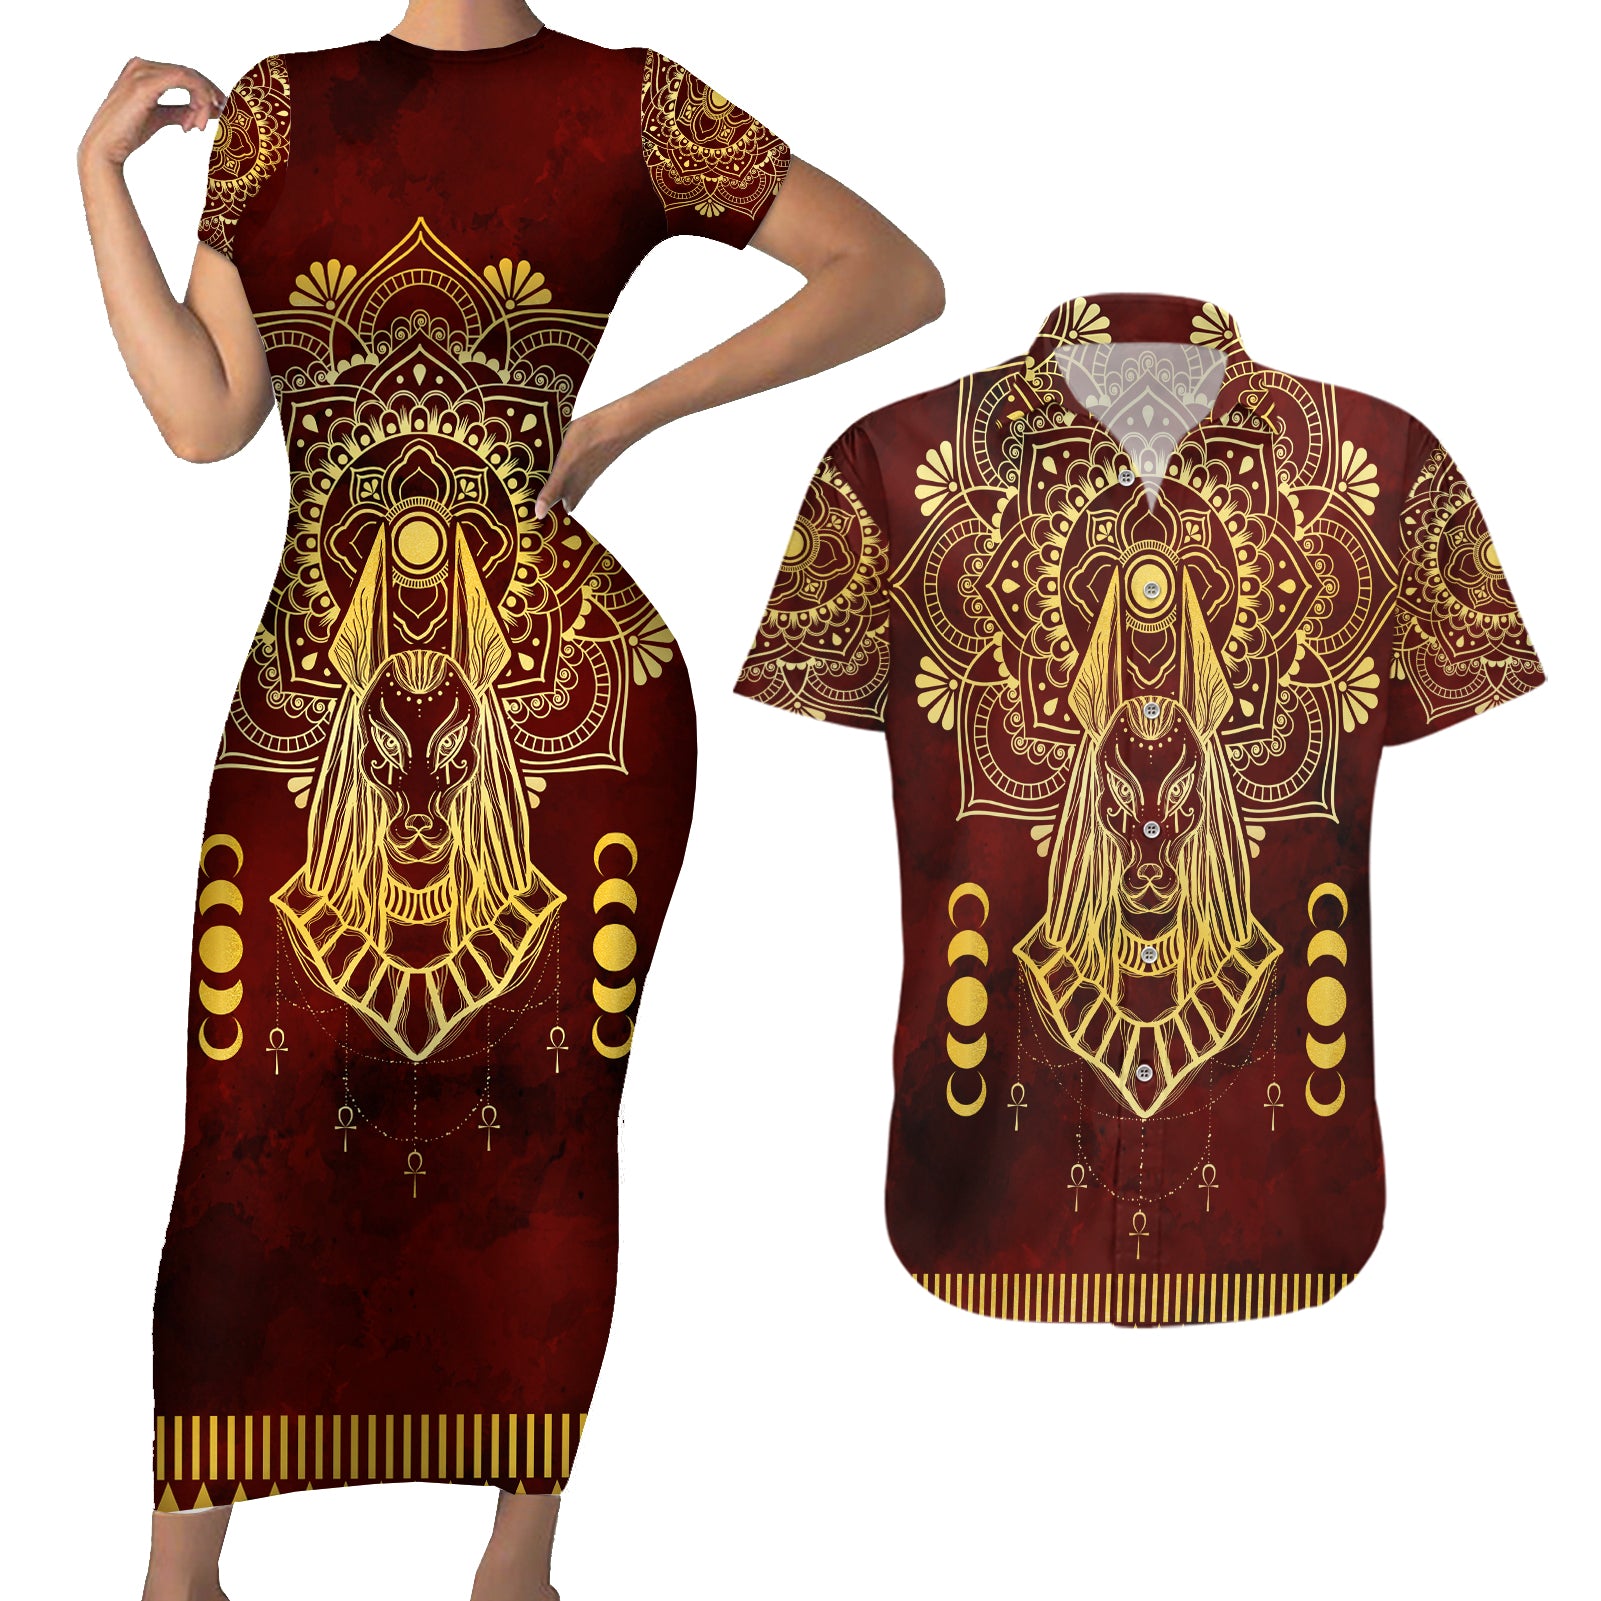 Personalized Anubis Couples Matching Short Sleeve Bodycon Dress and Hawaiian Shirt Ancient Egyptian Pattern In Red